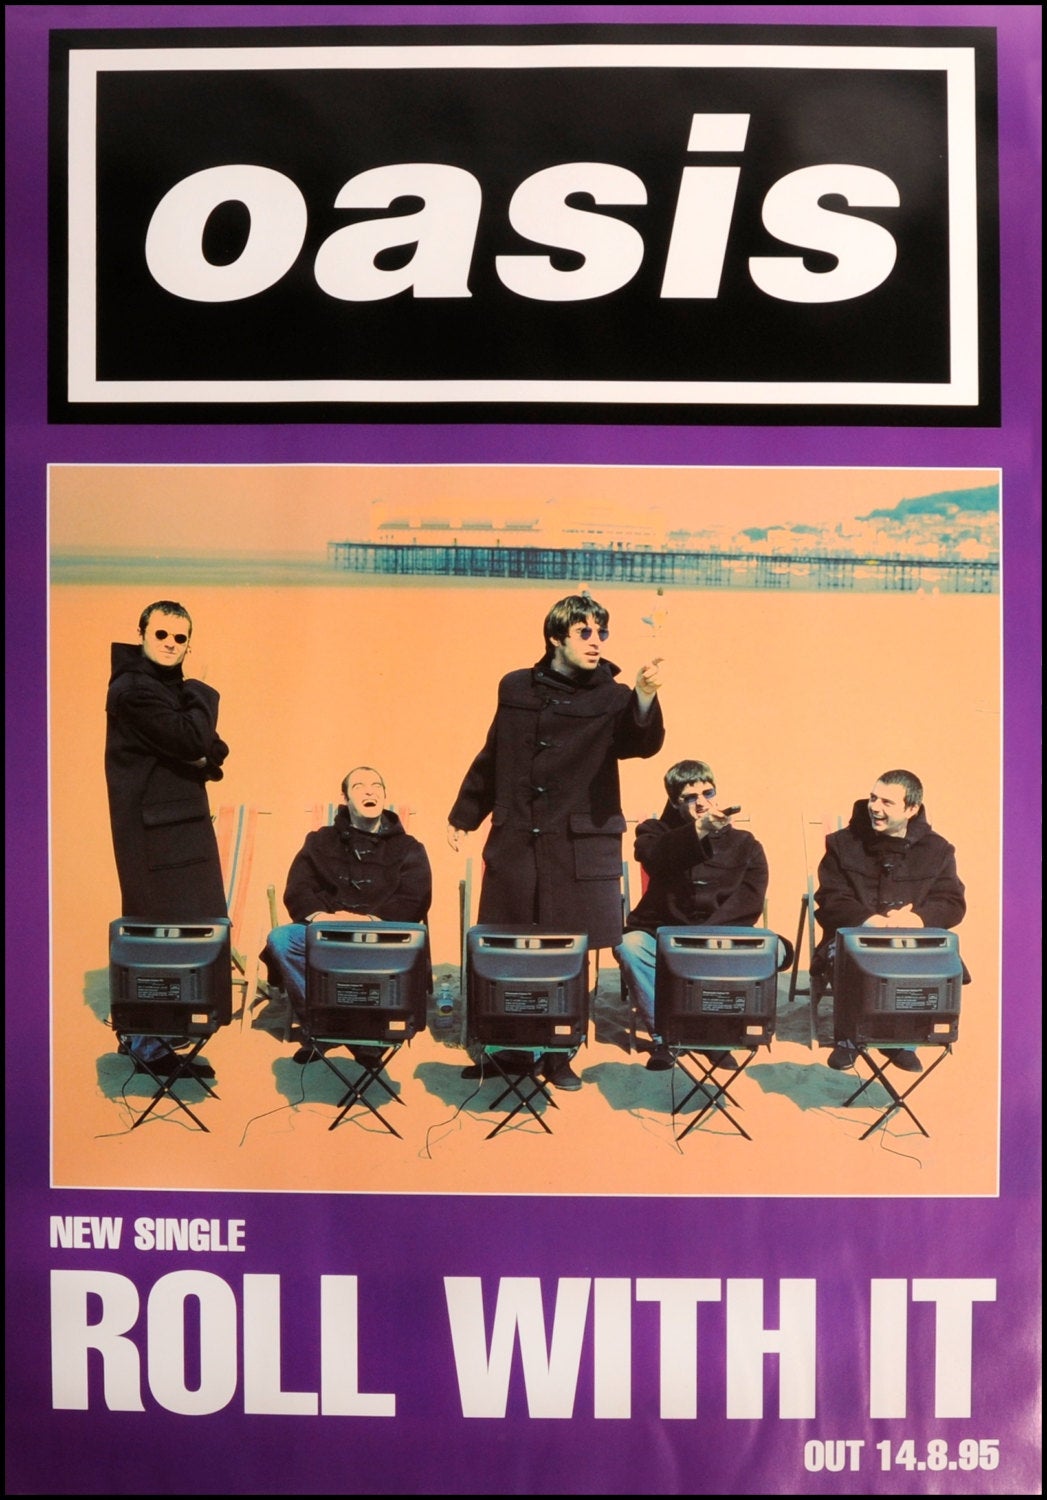 Vintage Music Art Poster - Oasis 'Roll With It' 0535